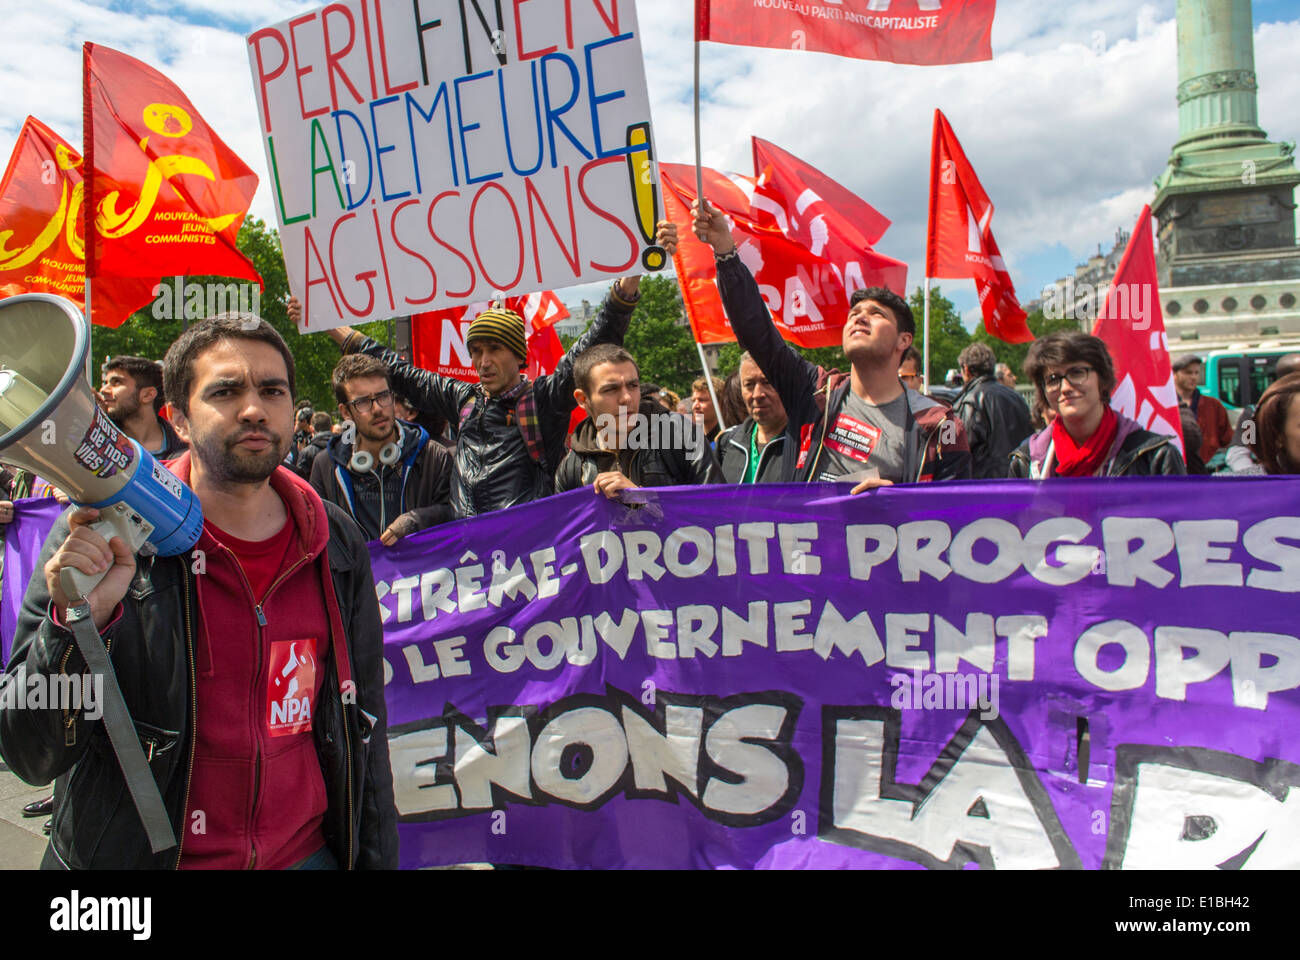 Paris, France, Protests against Extreme right Demonstration by French Teens Students, holding protest signs and banners, crowd scene, political Stock Photo